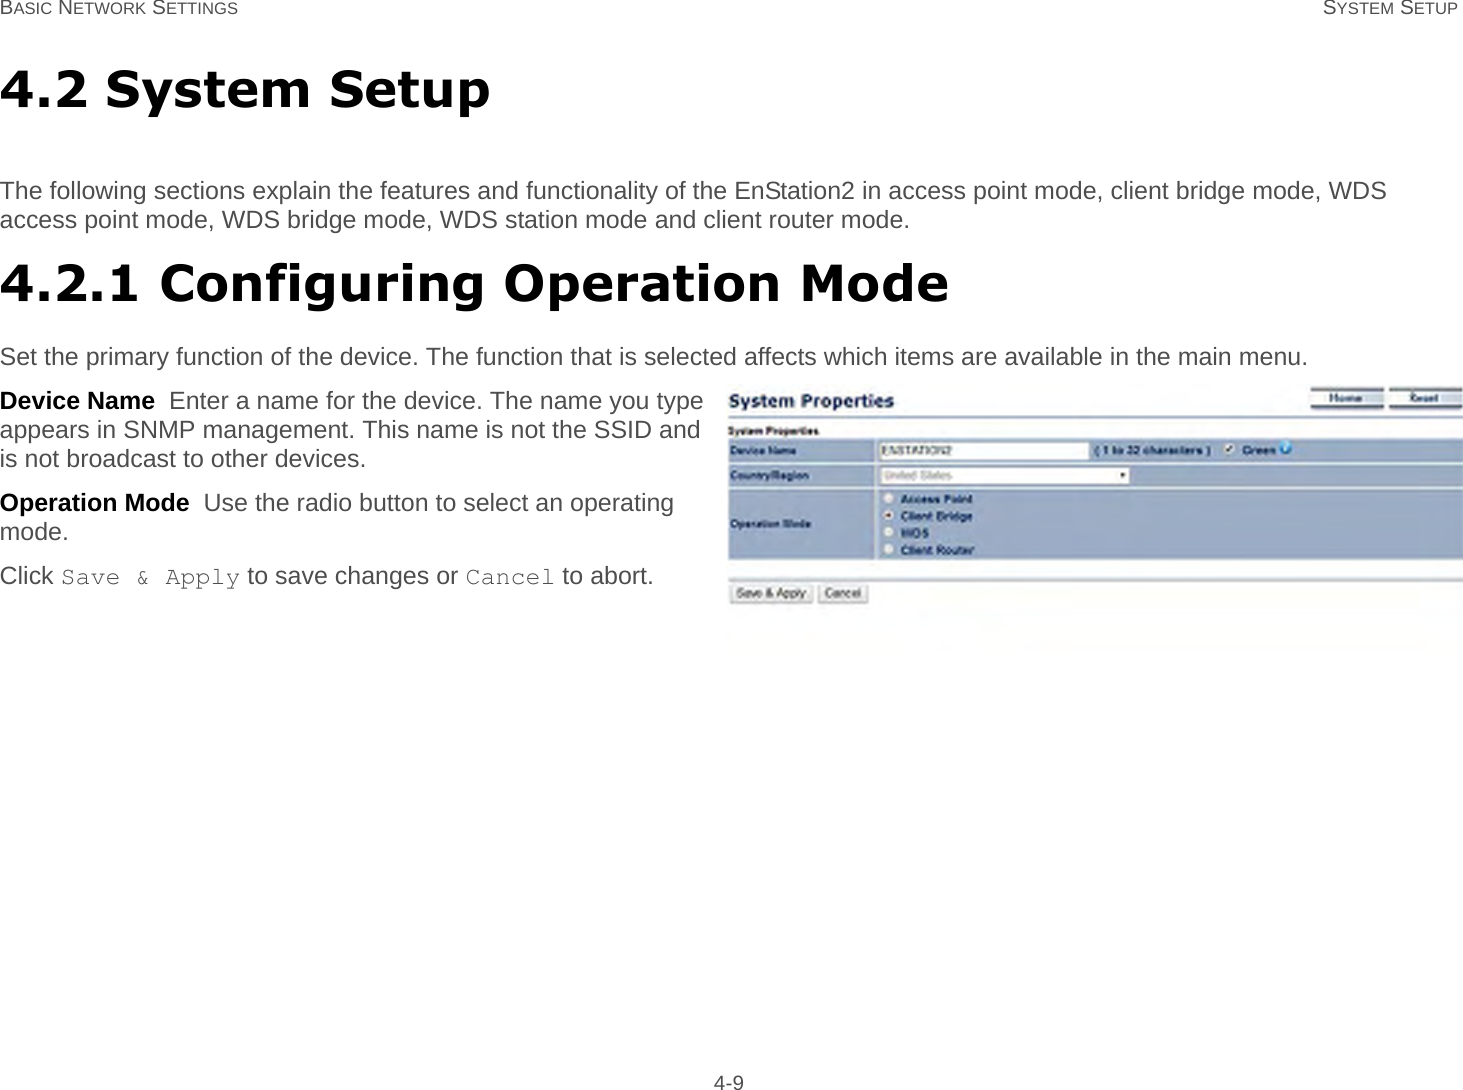 BASIC NETWORK SETTINGS SYSTEM SETUP 4-94.2 System SetupThe following sections explain the features and functionality of the EnStation2 in access point mode, client bridge mode, WDS access point mode, WDS bridge mode, WDS station mode and client router mode.4.2.1 Configuring Operation ModeSet the primary function of the device. The function that is selected affects which items are available in the main menu.Device Name  Enter a name for the device. The name you type appears in SNMP management. This name is not the SSID and is not broadcast to other devices.Operation Mode  Use the radio button to select an operating mode.Click Save &amp; Apply to save changes or Cancel to abort.